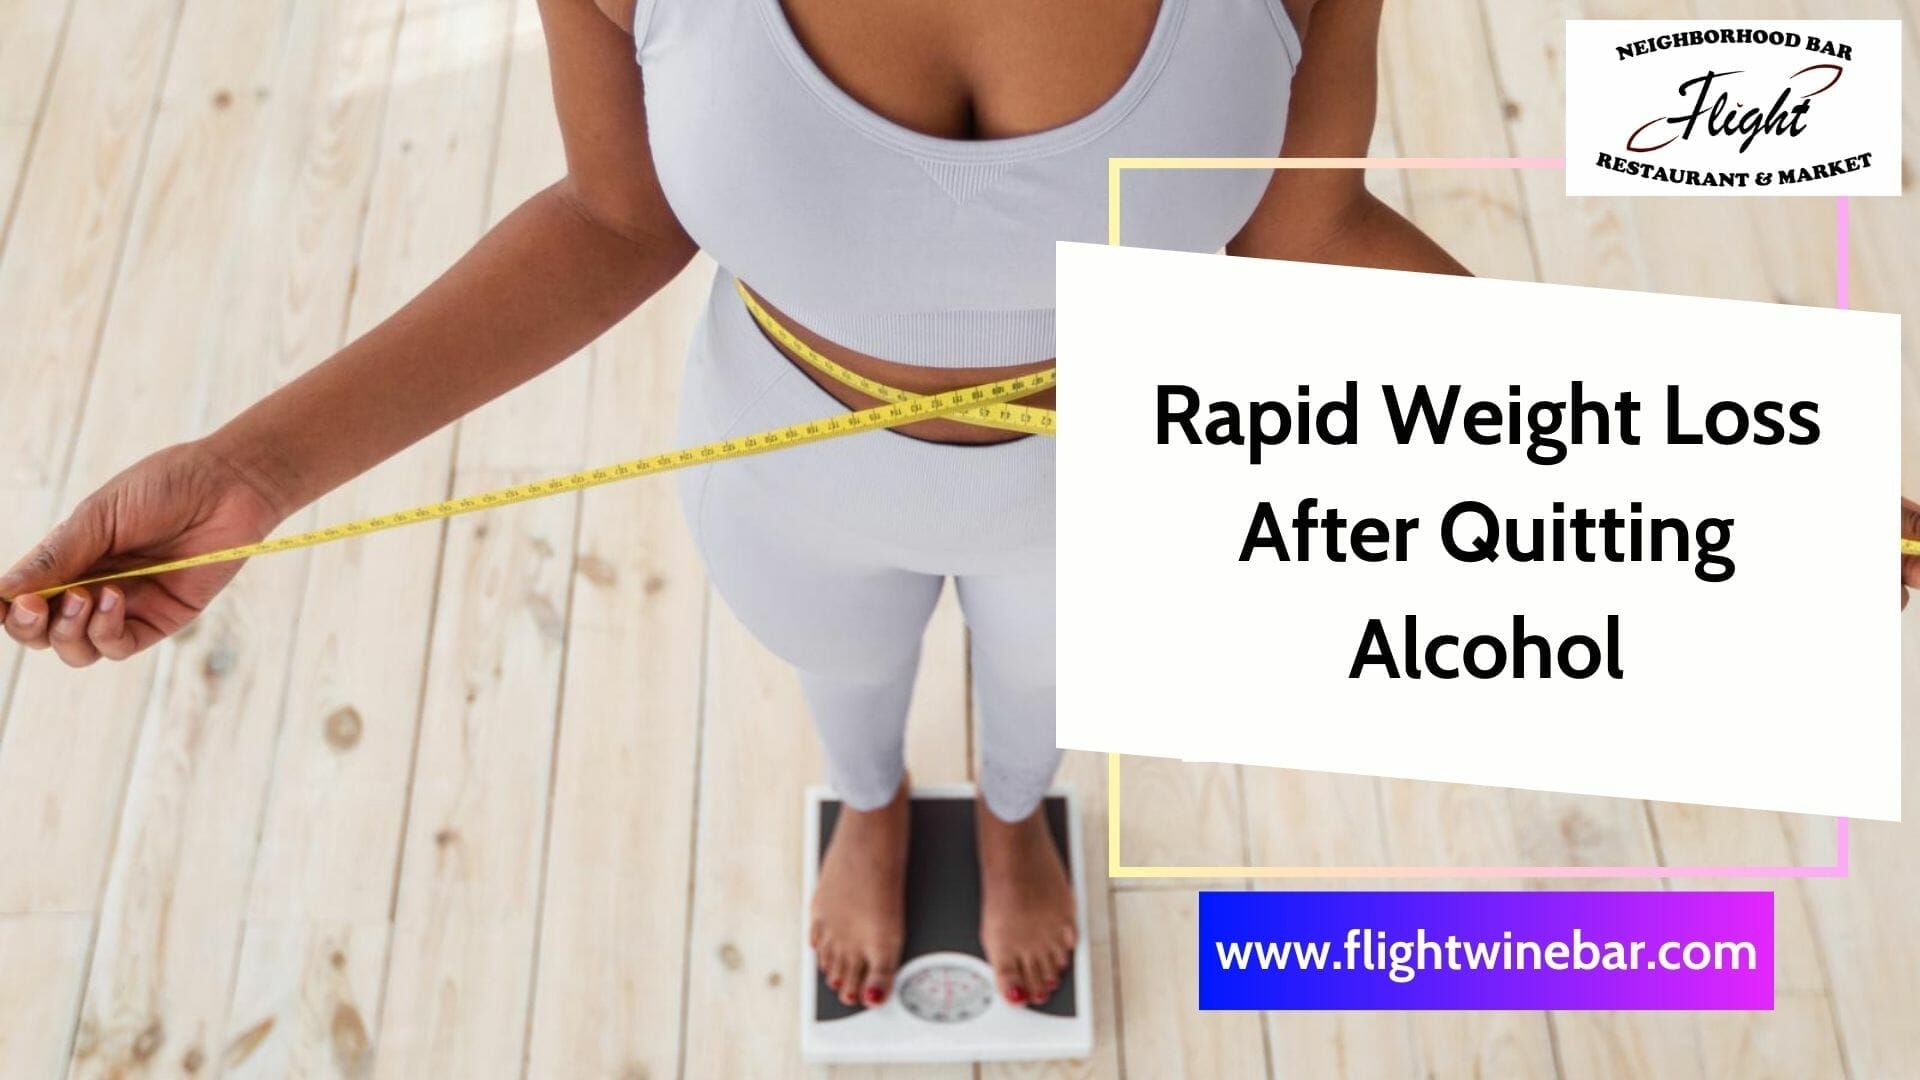 Rapid Weight Loss After Quitting Alcohol